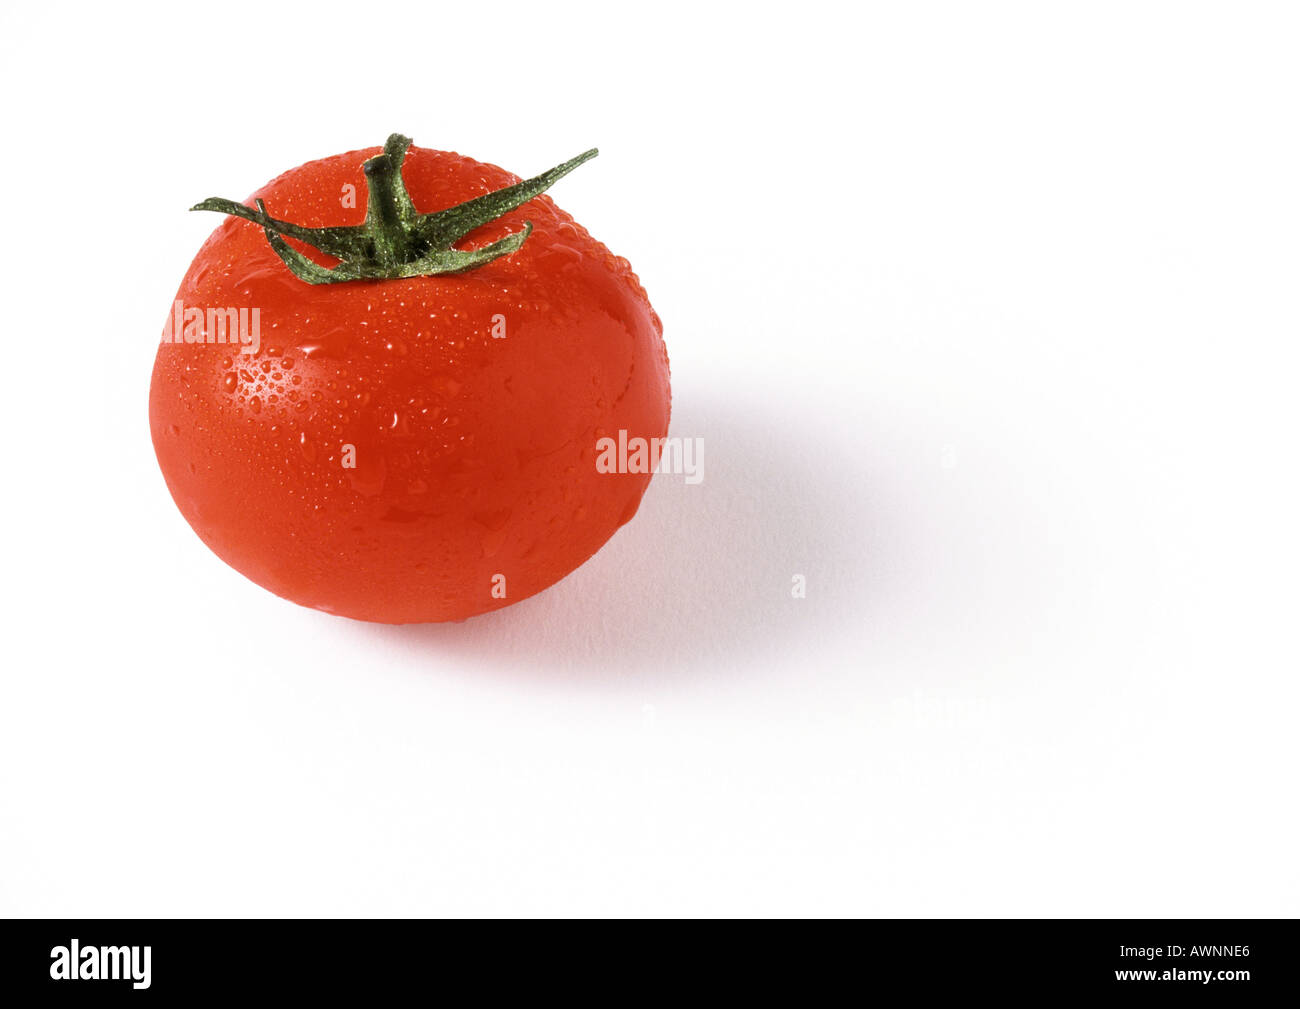 Tomato with stem, covered with droplets of water, close-up Stock Photo